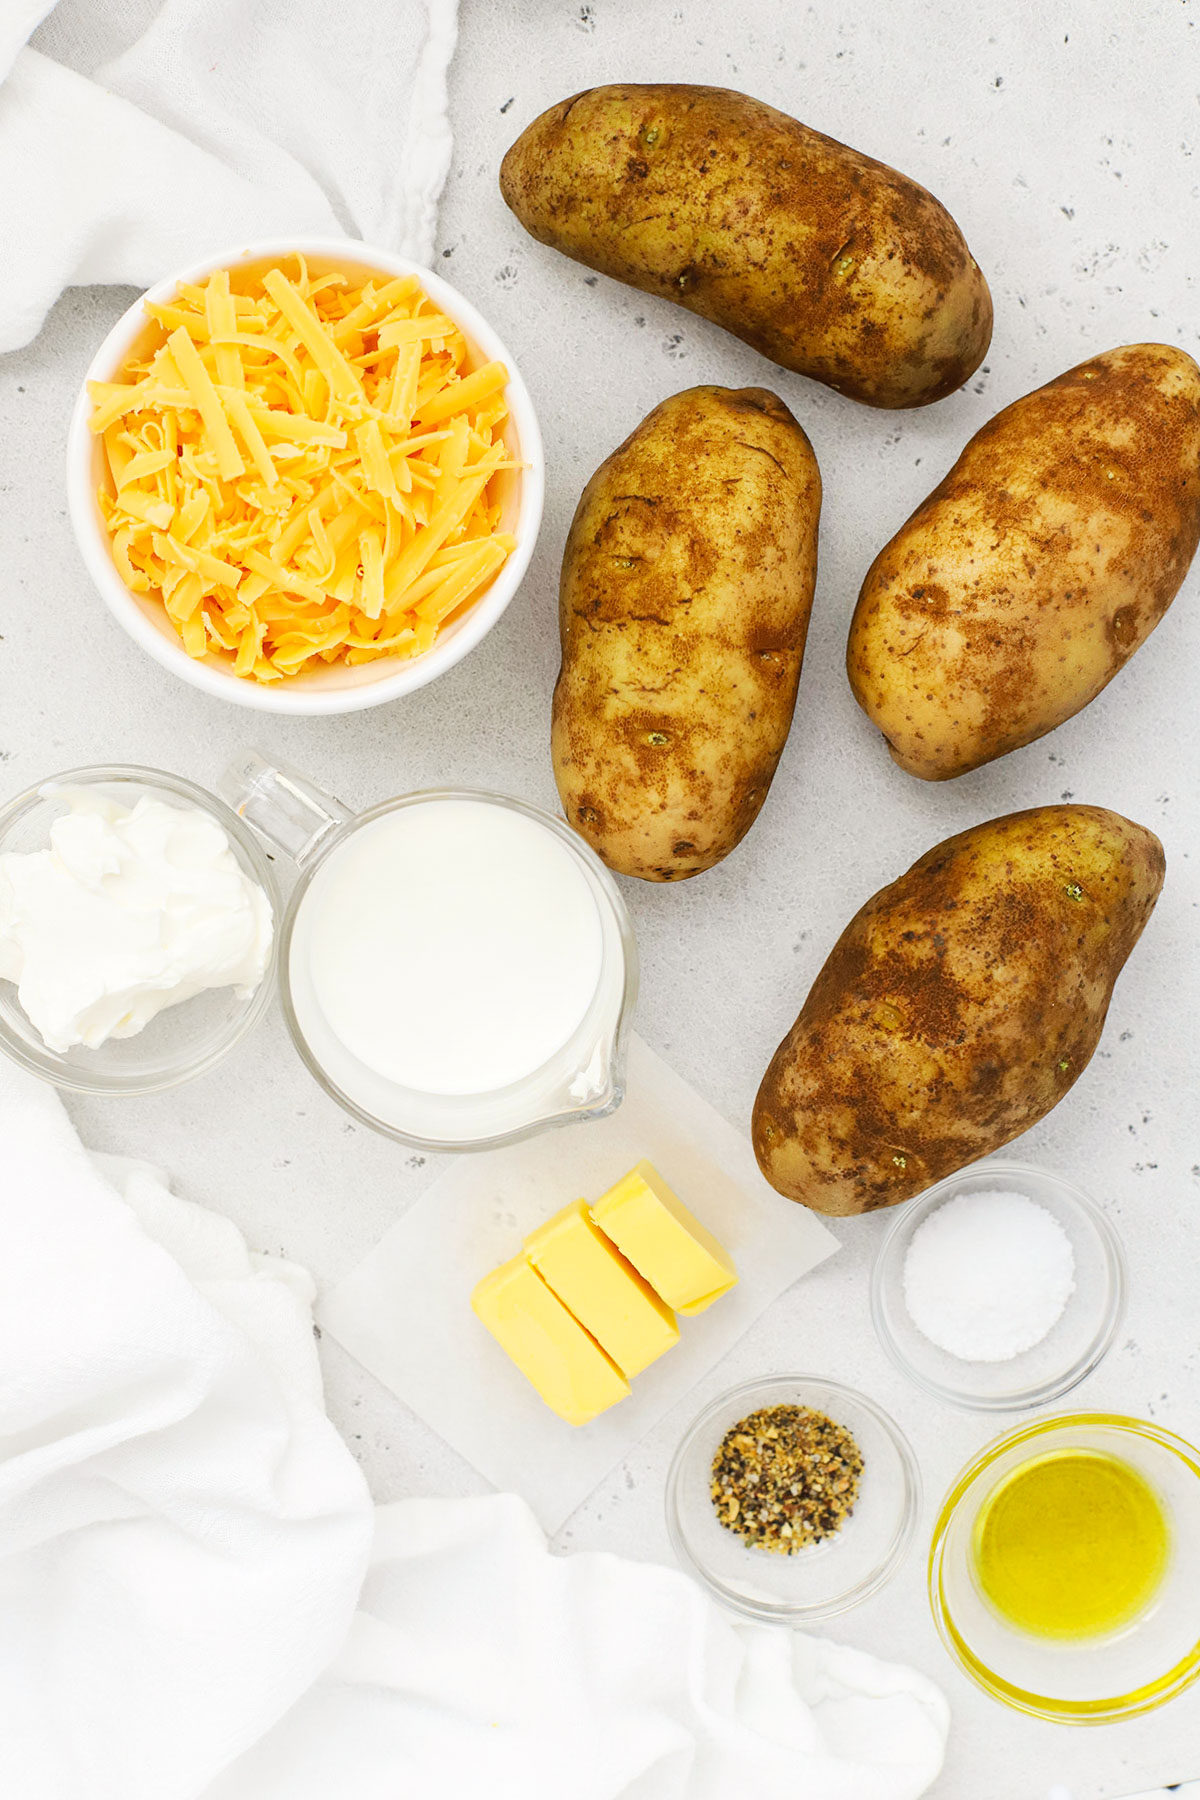 Ingredients for twice-baked potatoes